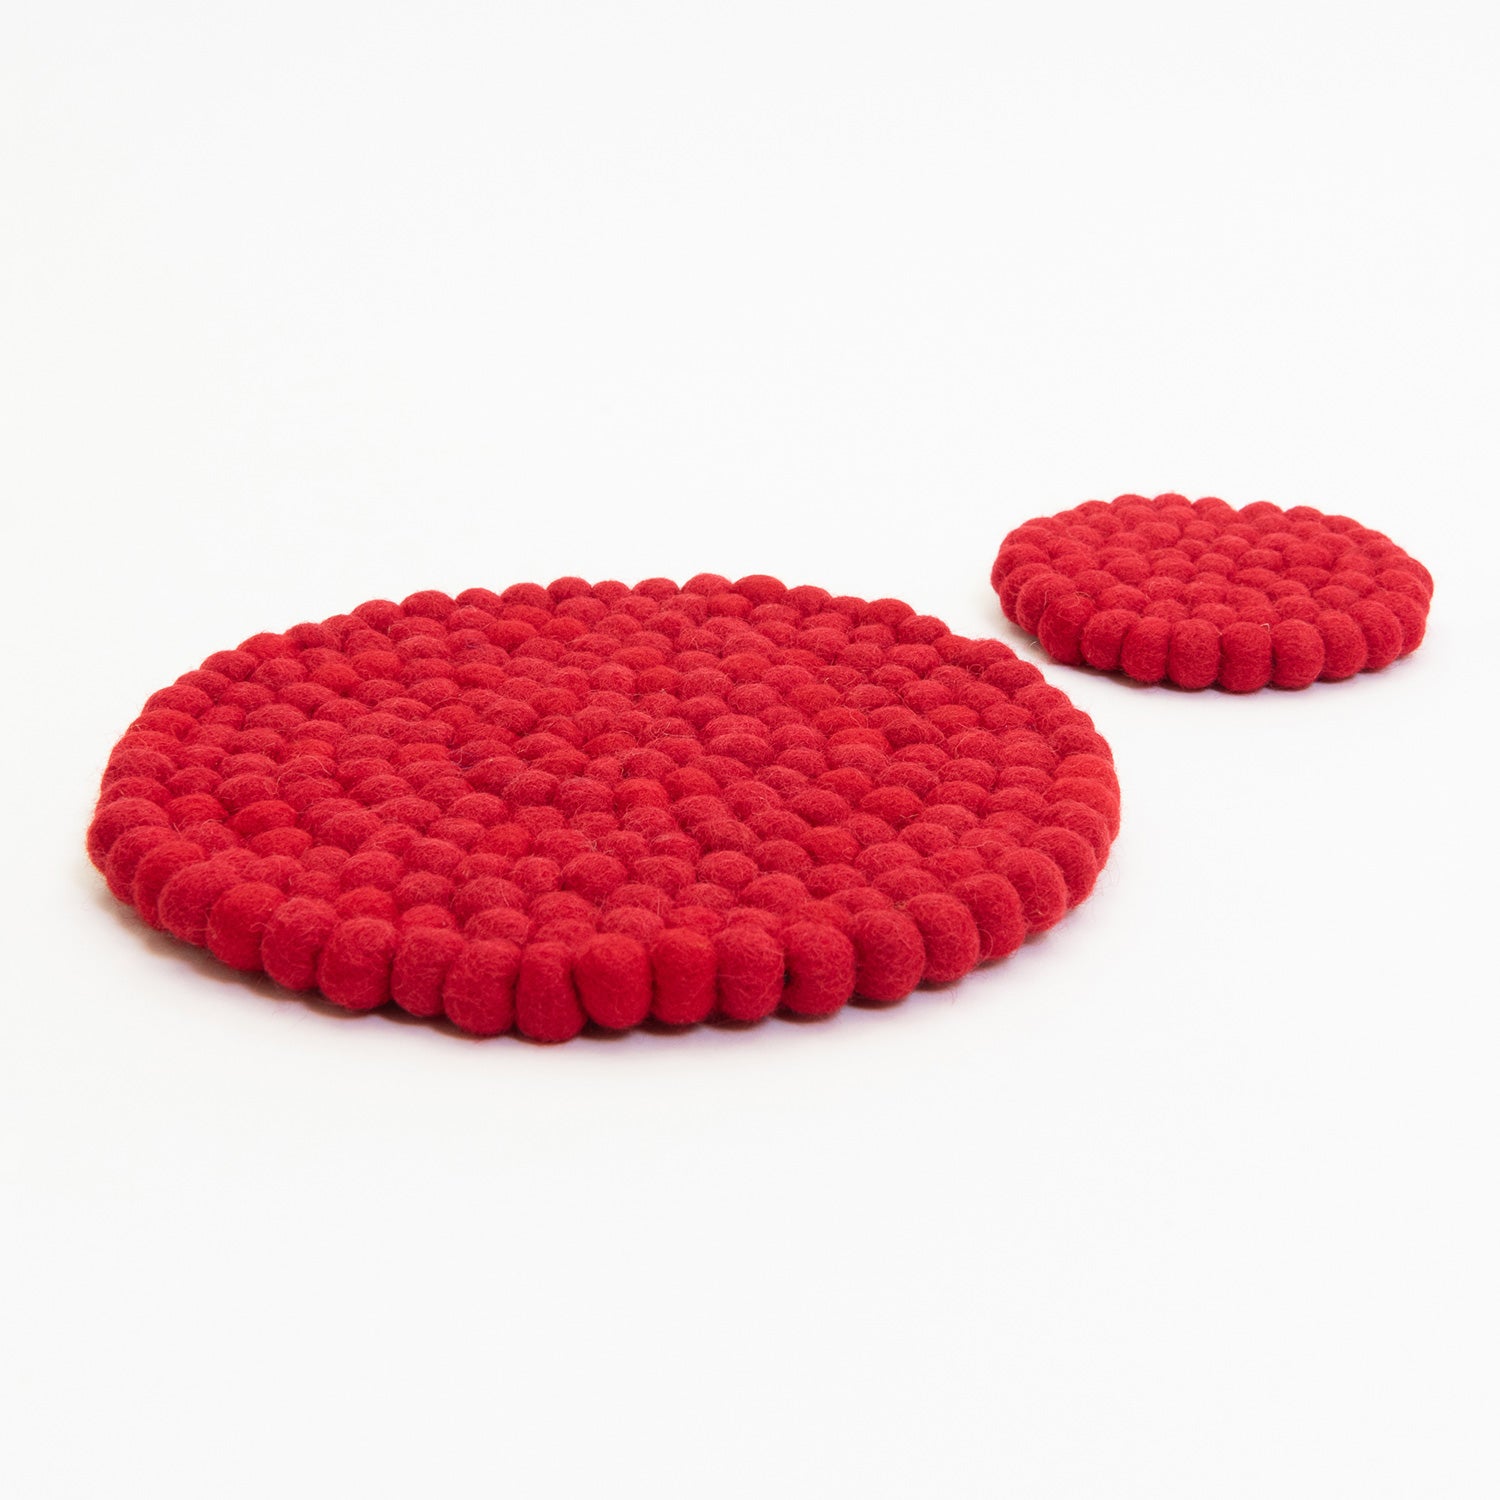 A red felt ball trivet and a red felt ball coaster pictured on a white background.